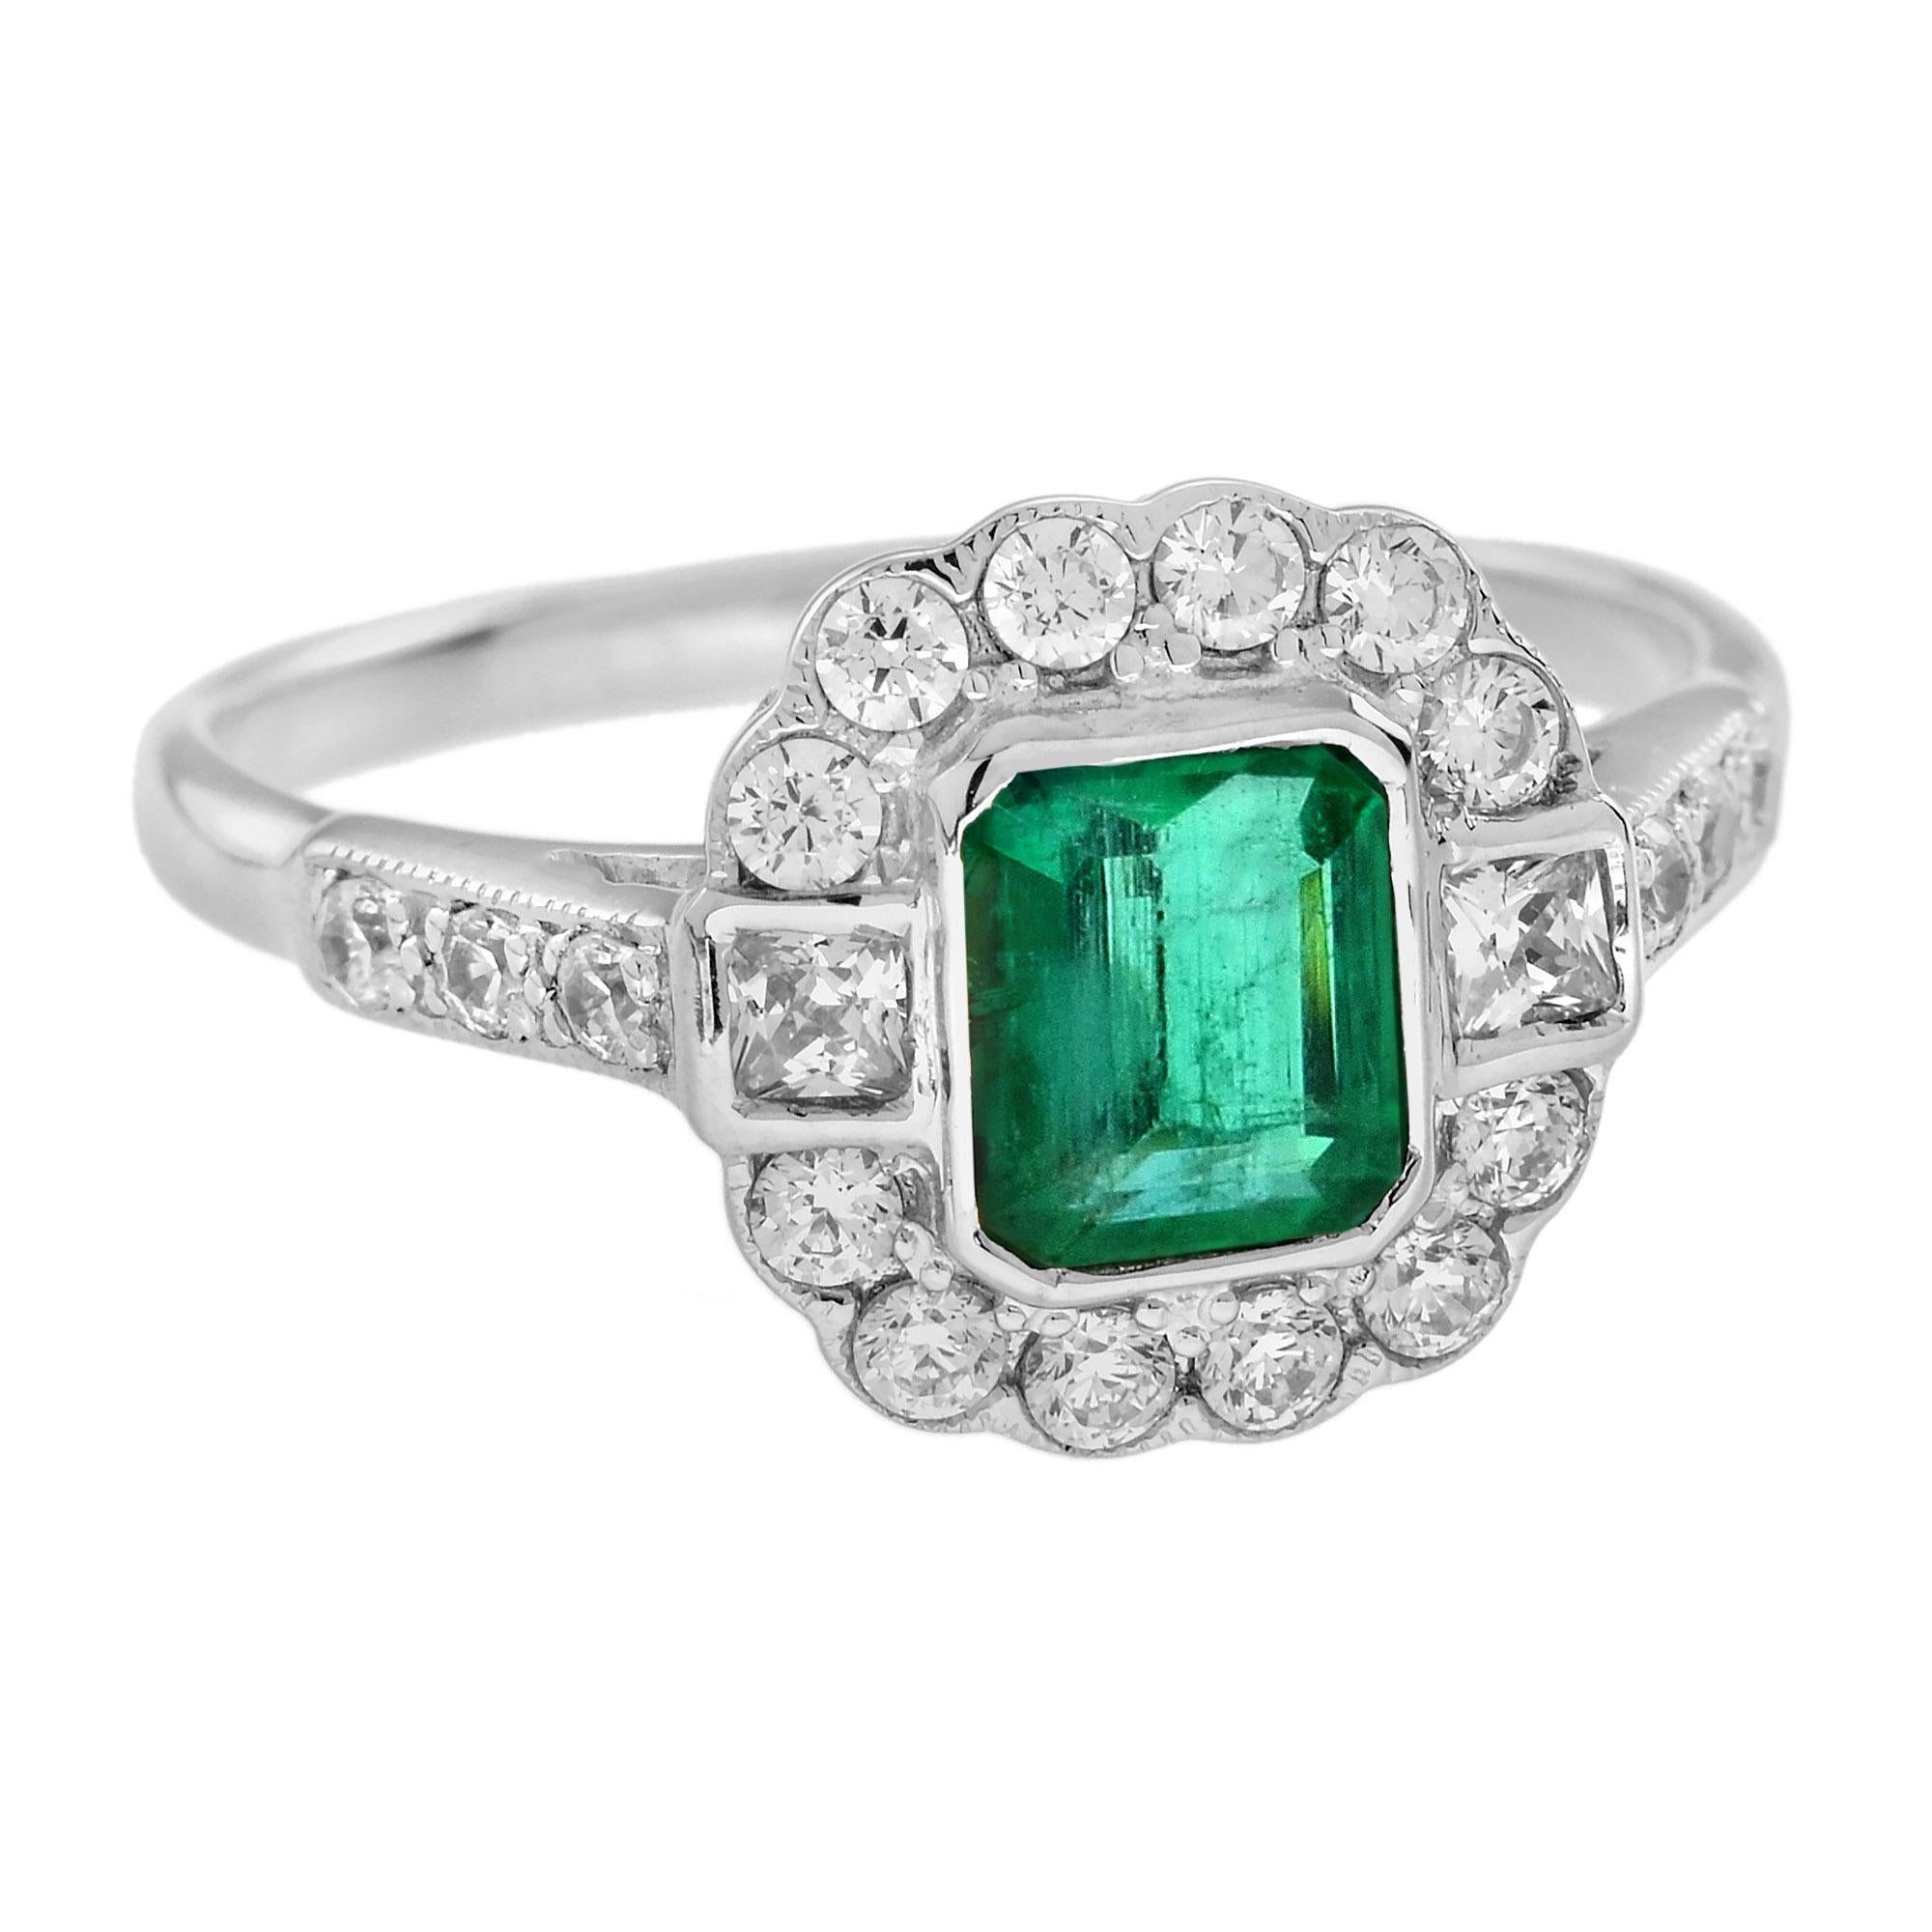 Art Deco 0.60 Ct. Emerald Diamond Halo Antique Style Engagement Ring in 18K White Gold For Sale